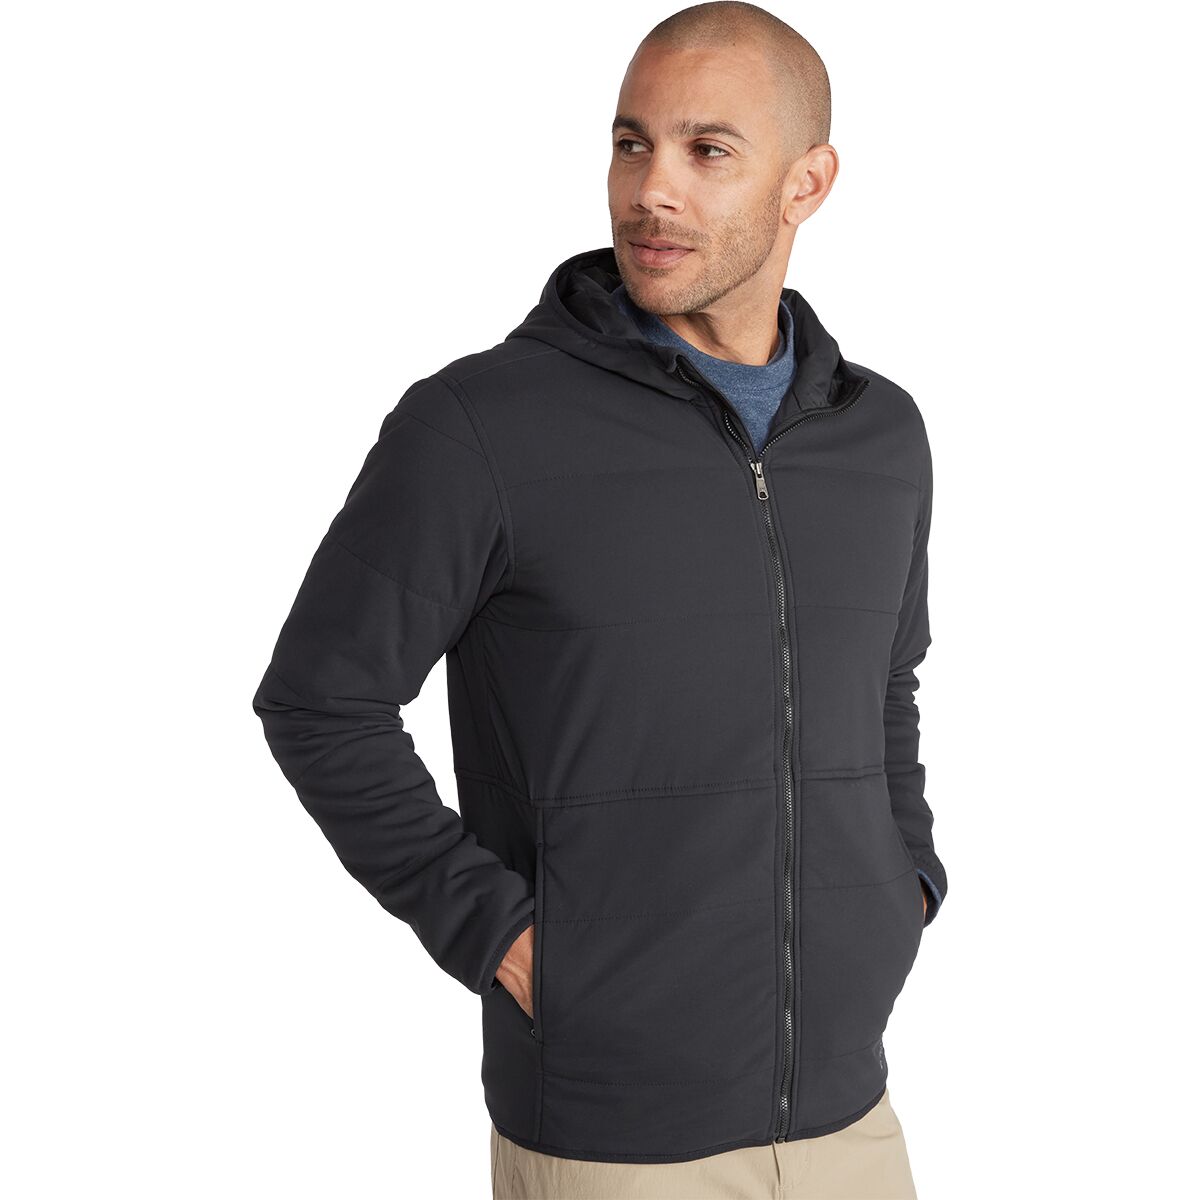 Pargo Insulated Hooded Jacket - Men